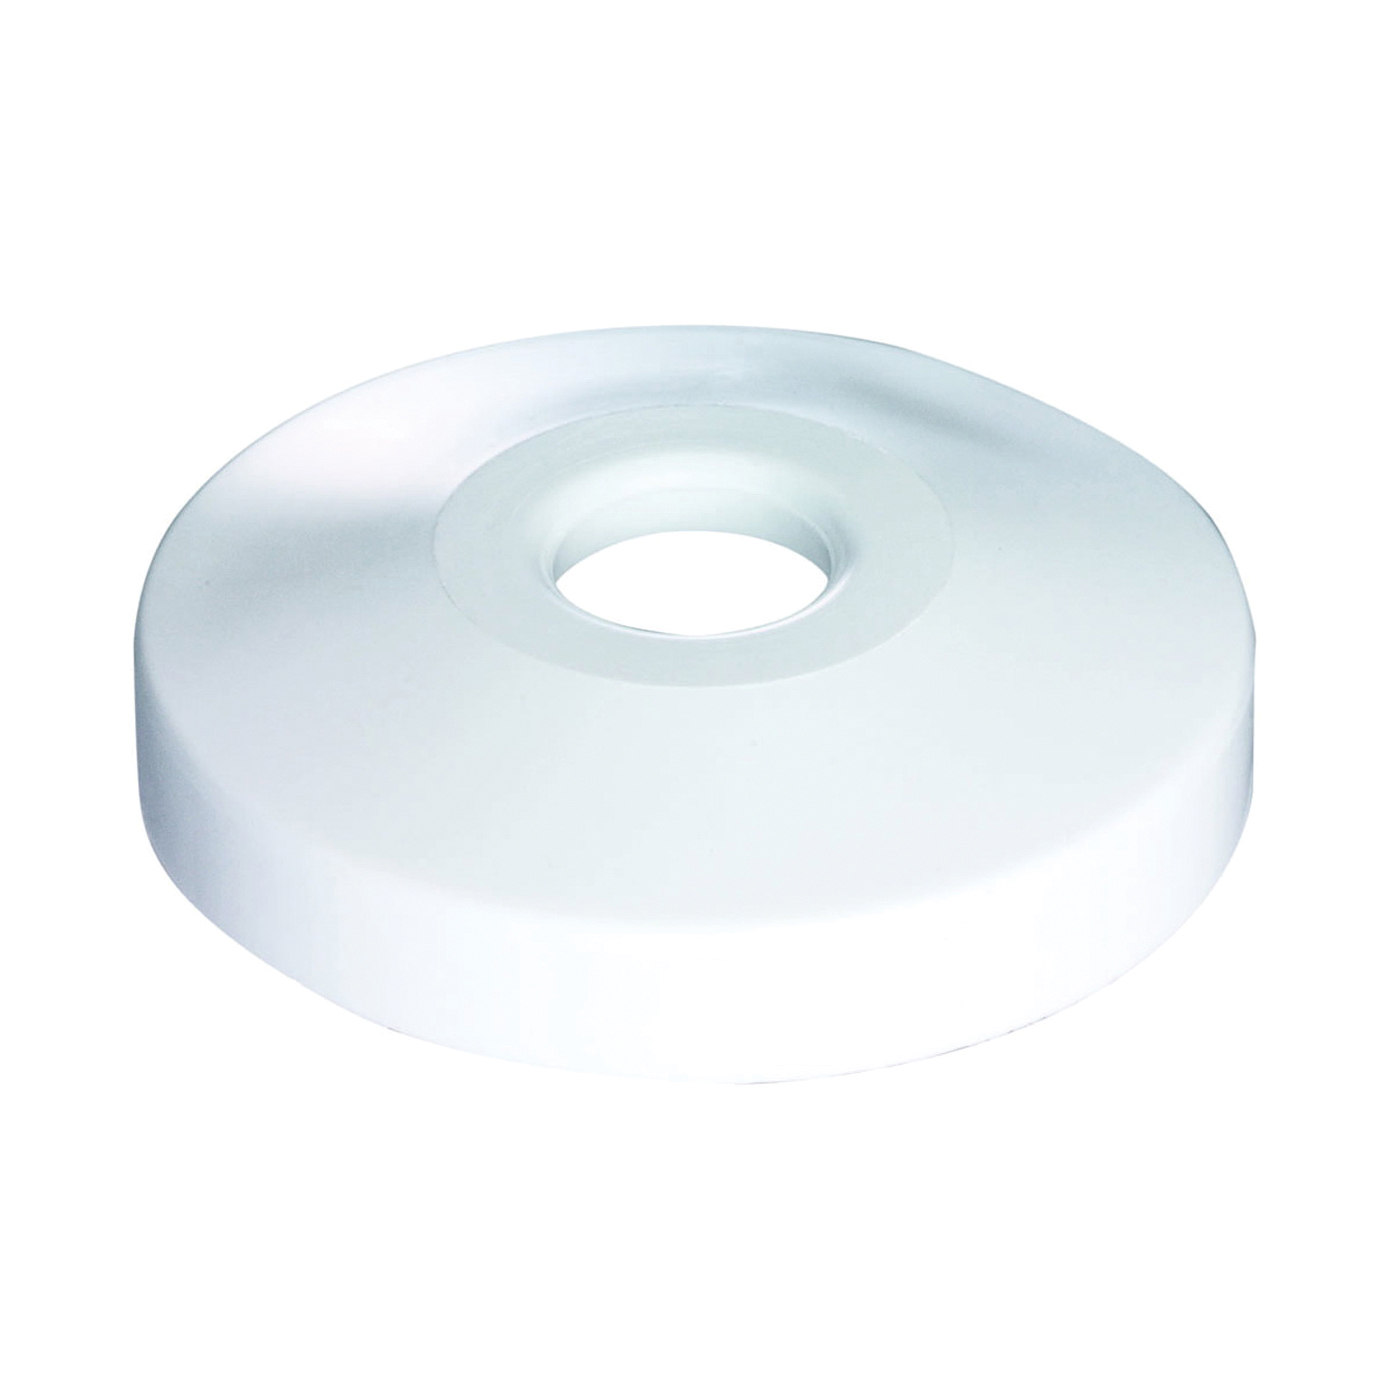 PP808-84 Bath Flange, 3-1/2 in OD, For: 1/2 in Pipes, Plastic, White